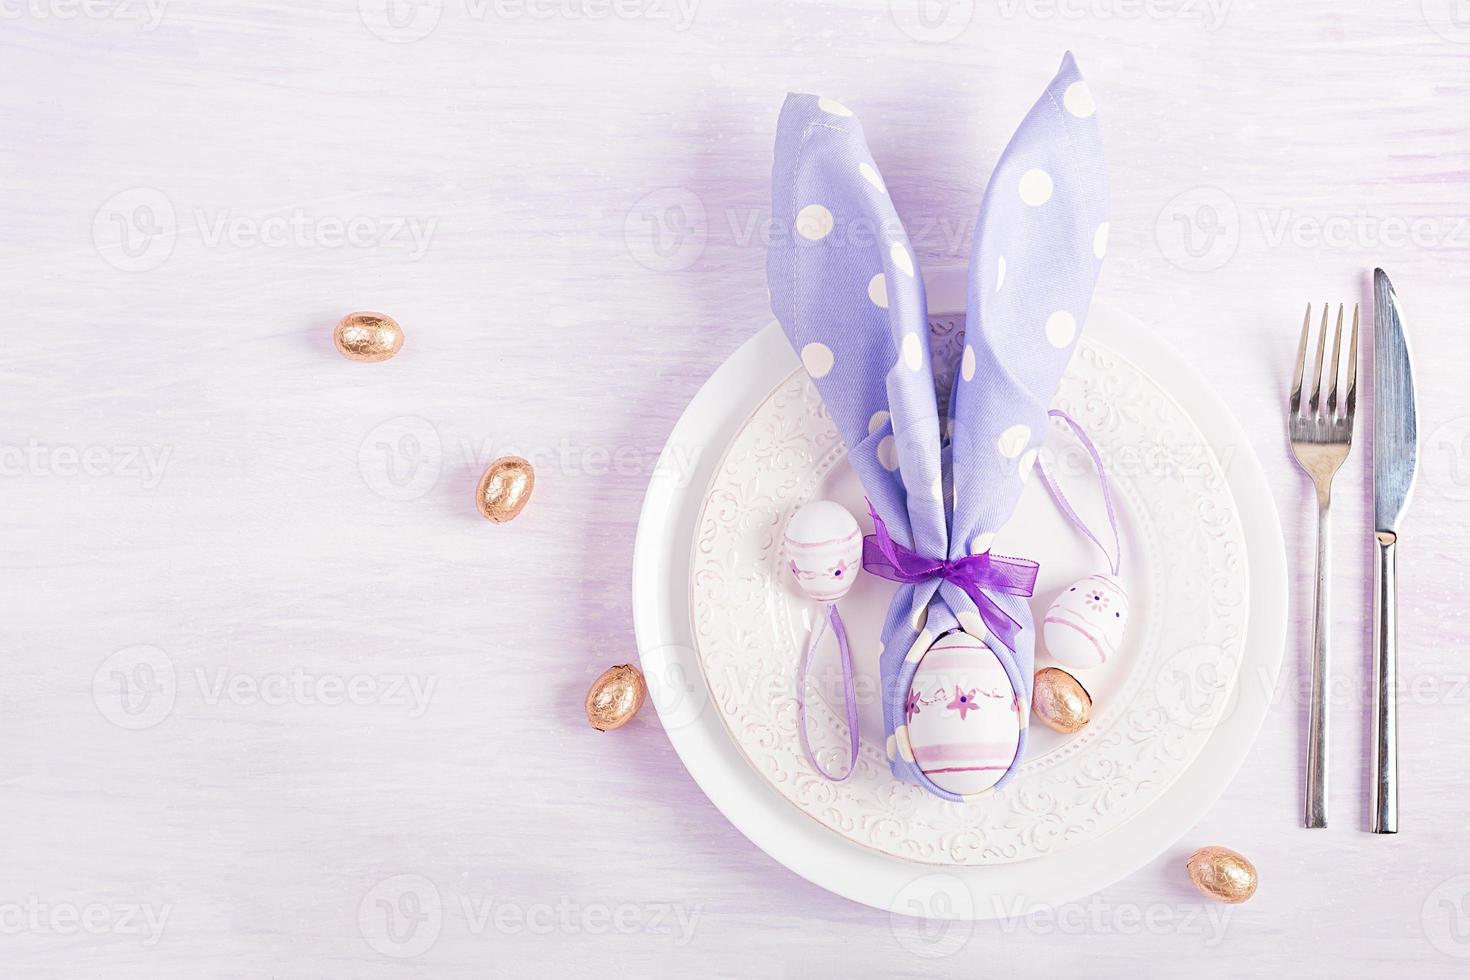 Easter table setting. White plate with a napkin folded in the shape of a rabbit, Easter and chocolate eggs on a pink background. Happy Easter holiday concept. Top view, flat lay photo